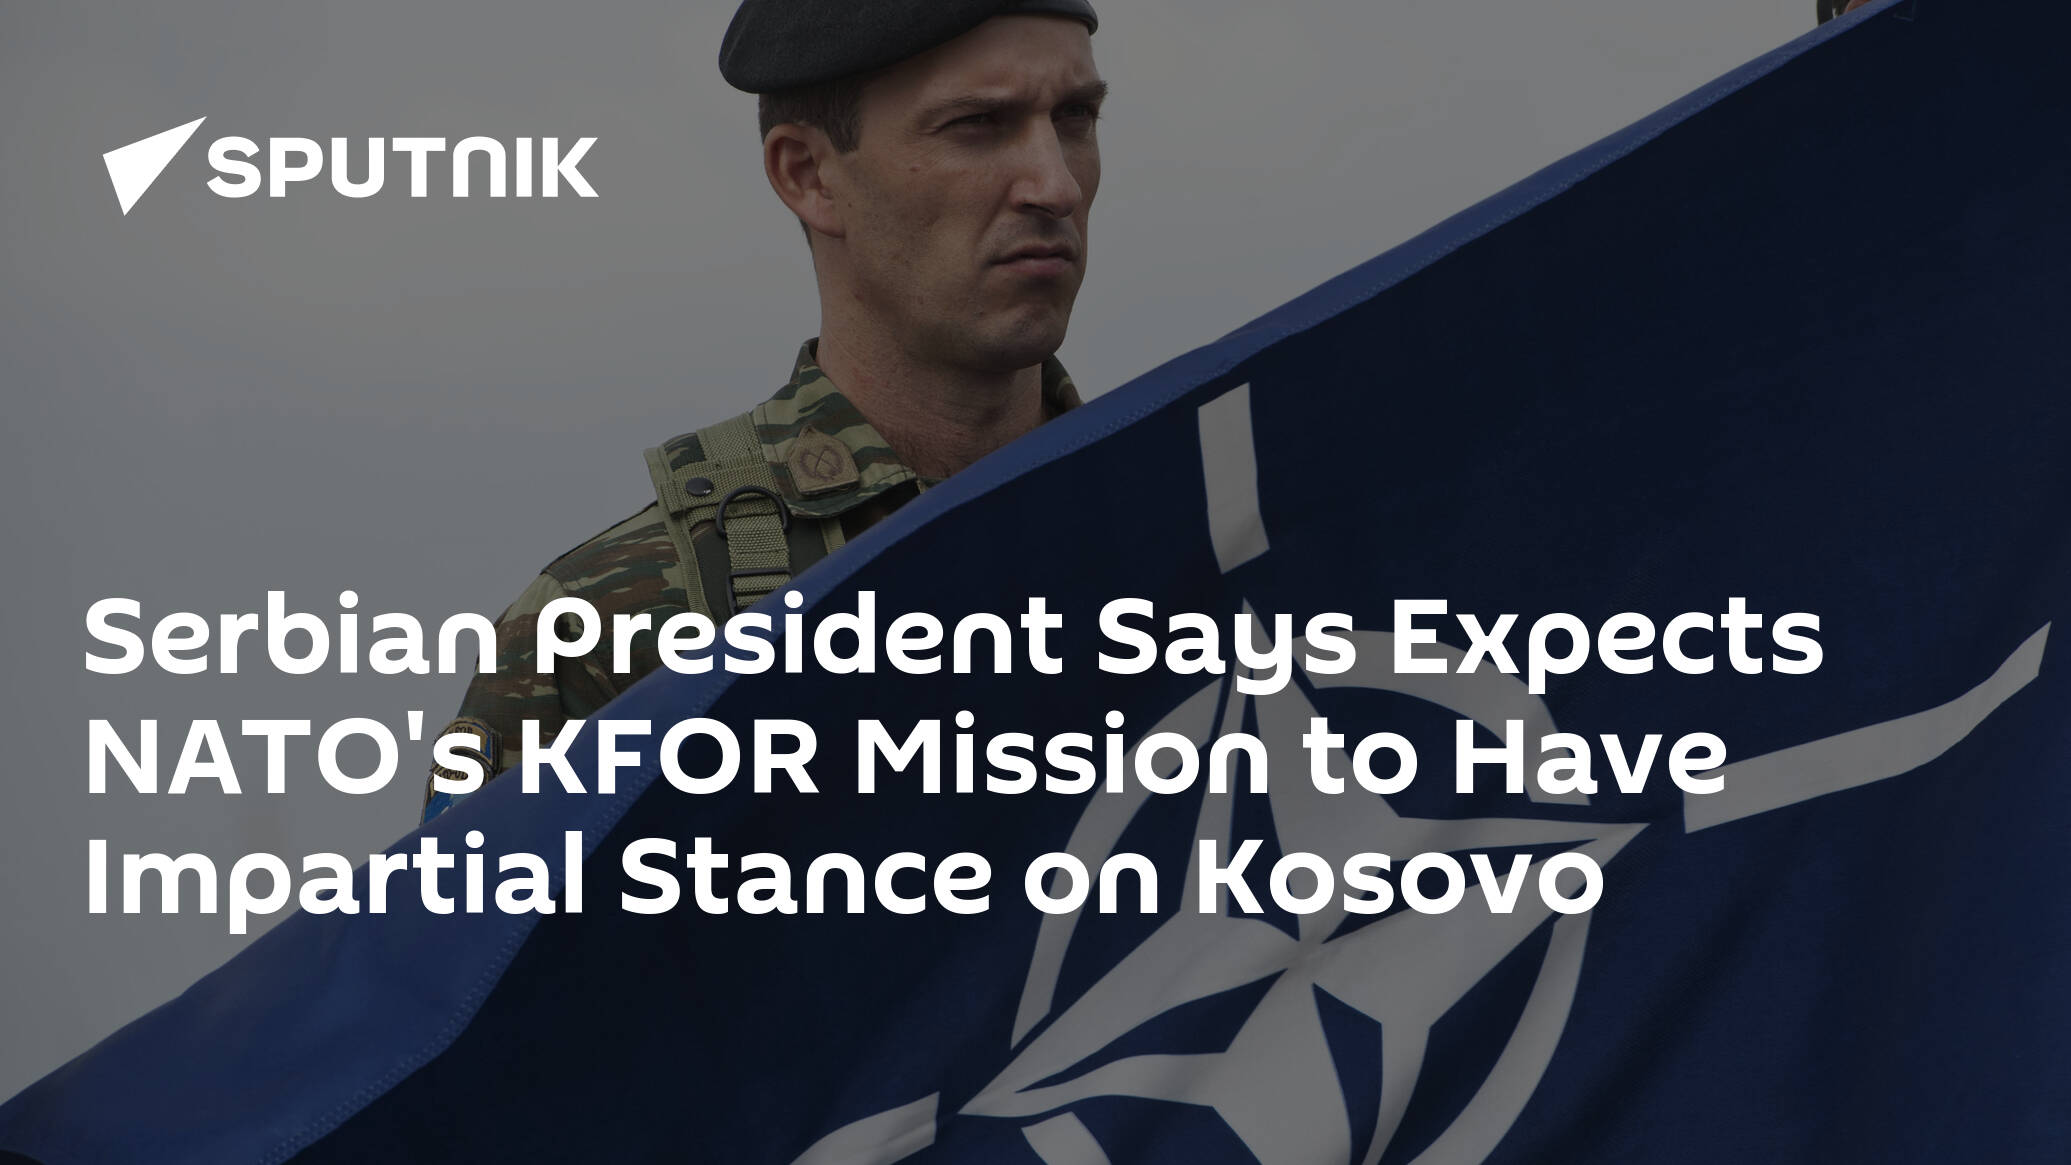 Serbian President Says Expects NATO's KFOR Mission to Have Impartial Stance on Kosovo